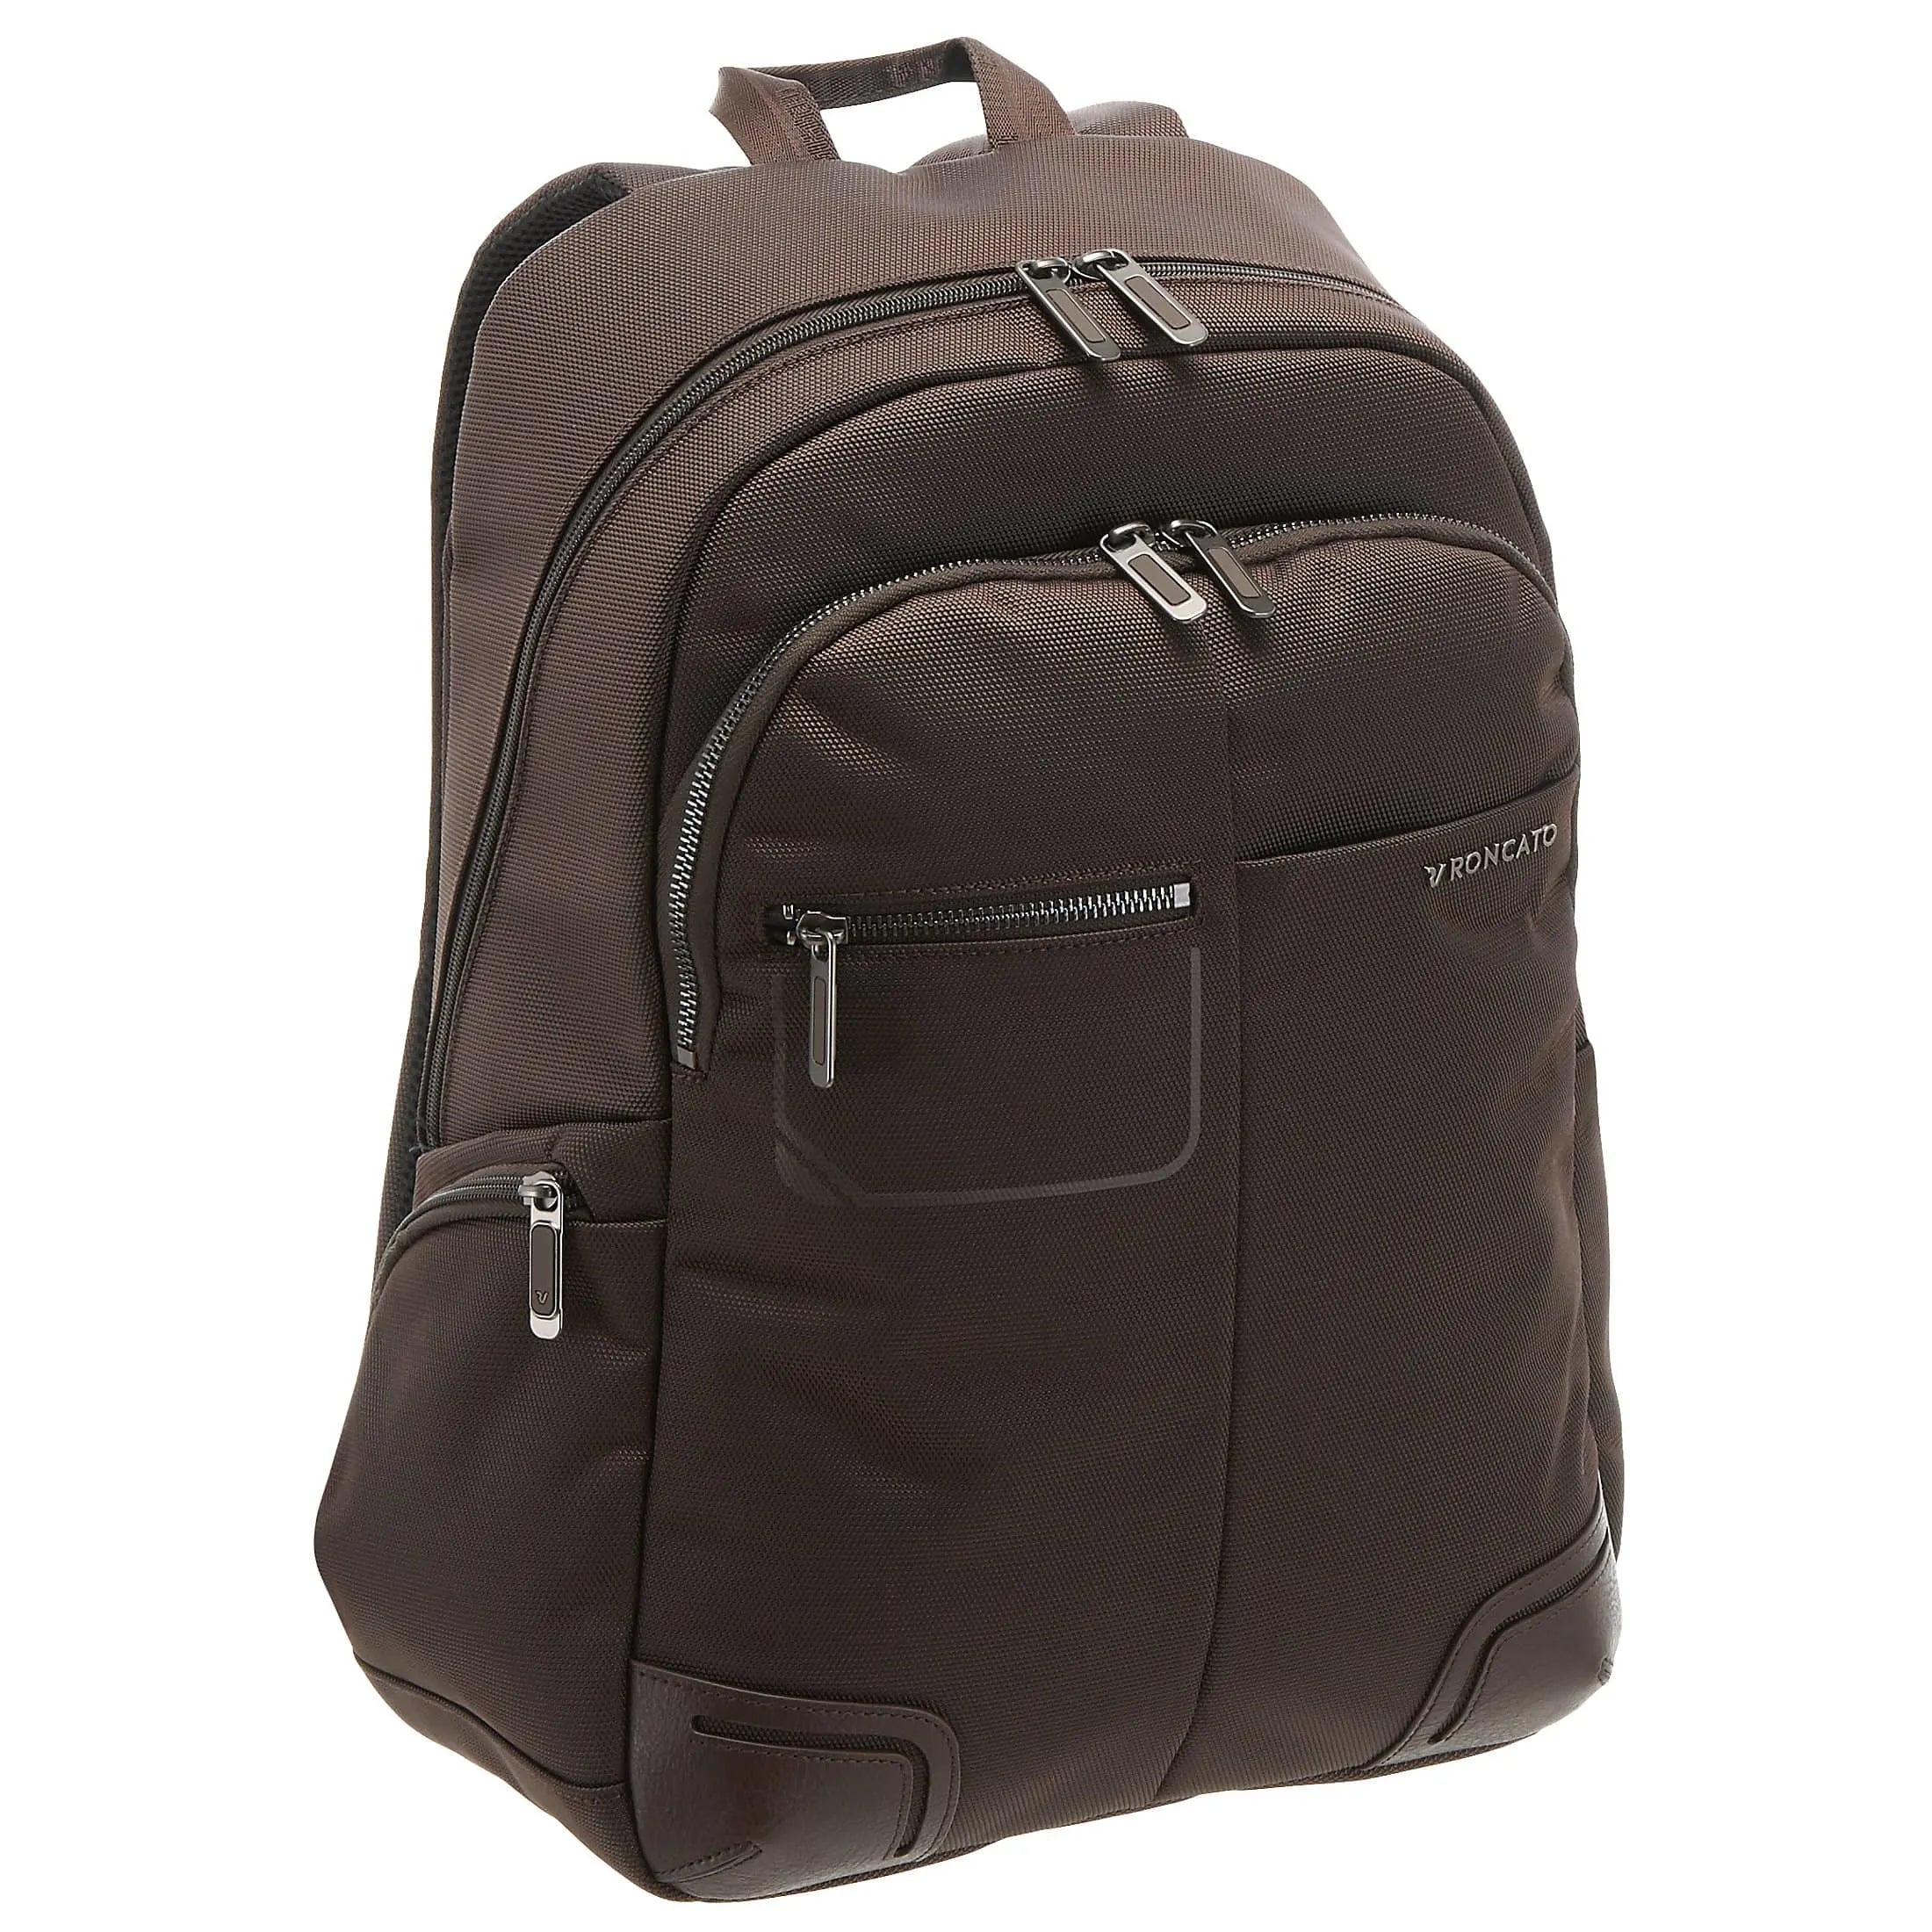 Roncato Wall Street Laptop Backpack 43 cm - brown